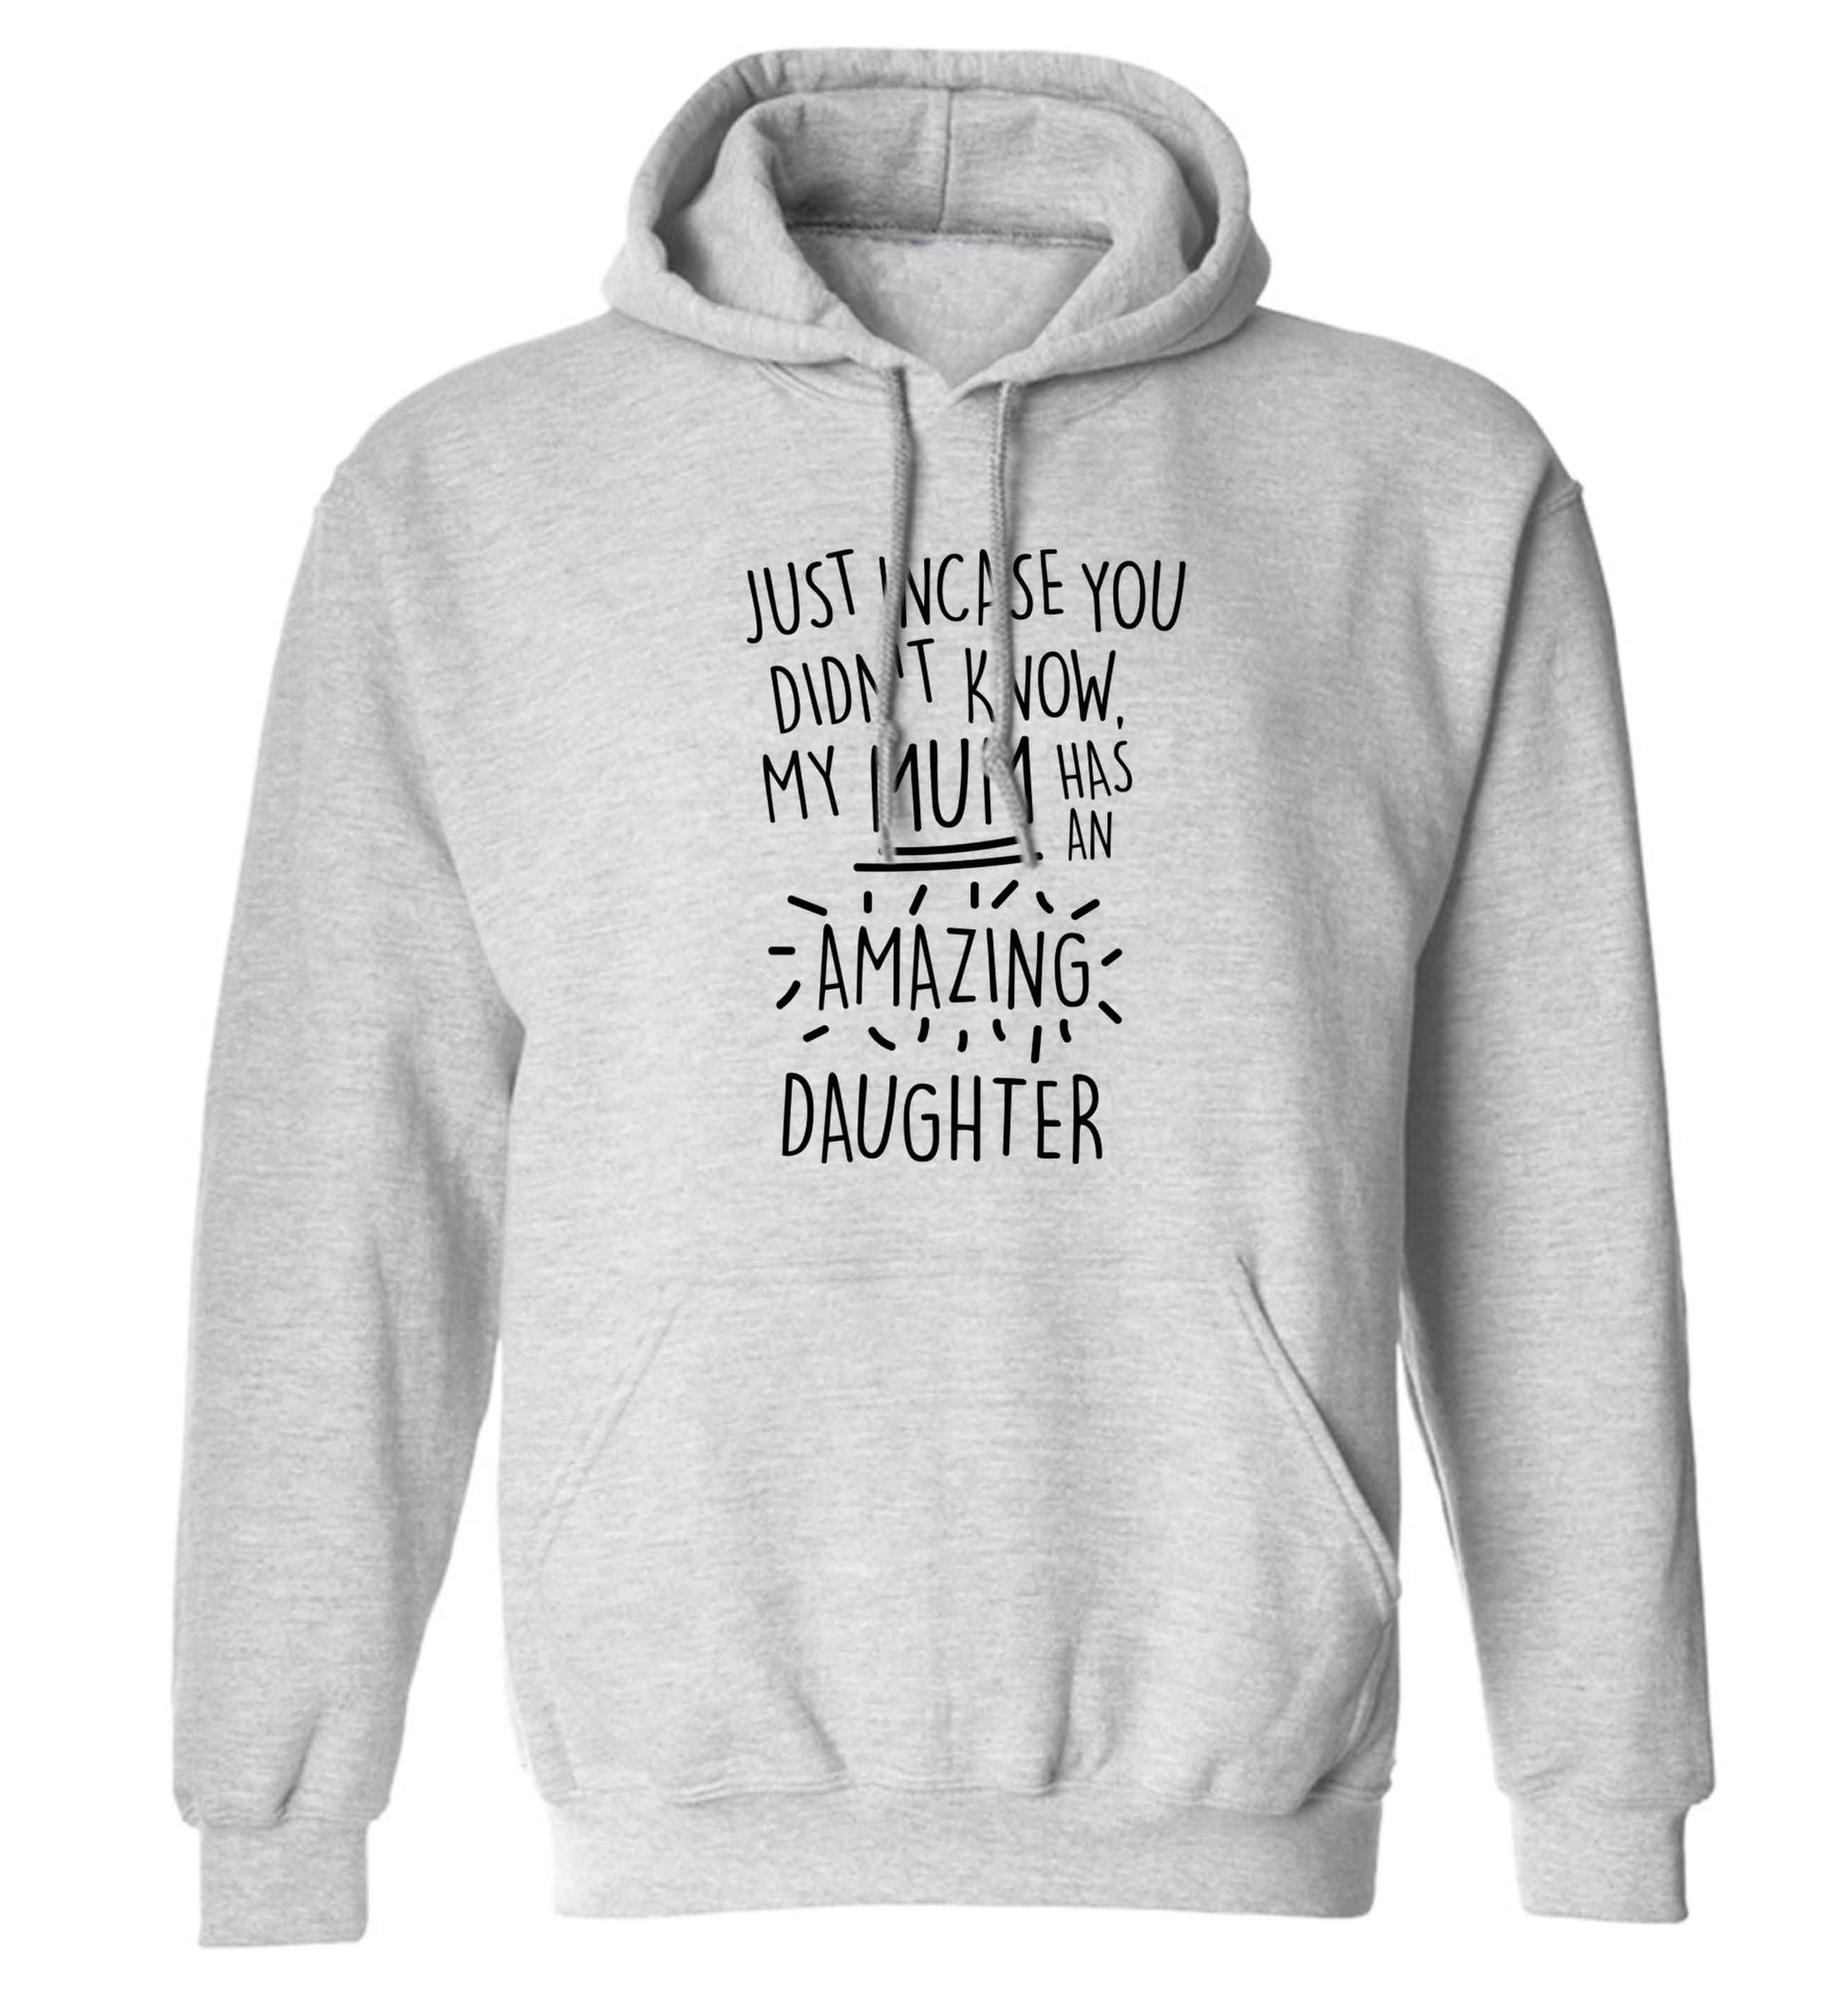 Just incase you didn't know my mum has an amazing daughter adults unisex grey hoodie 2XL